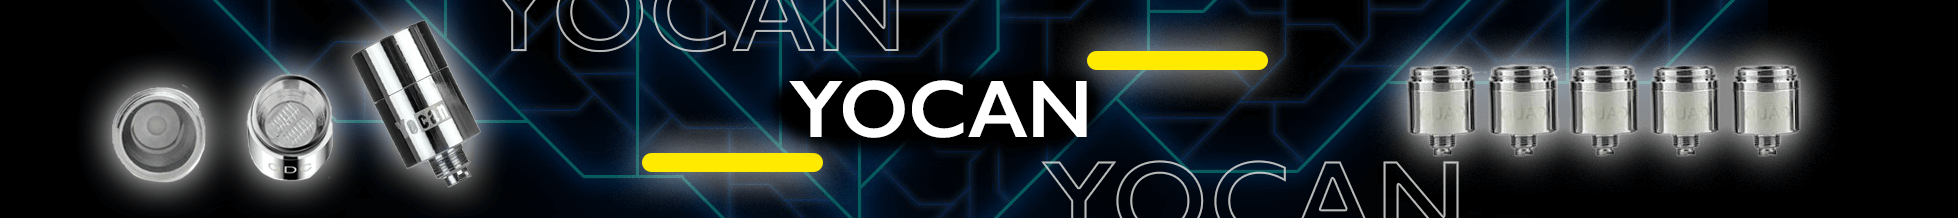 yocan-category-banner.png